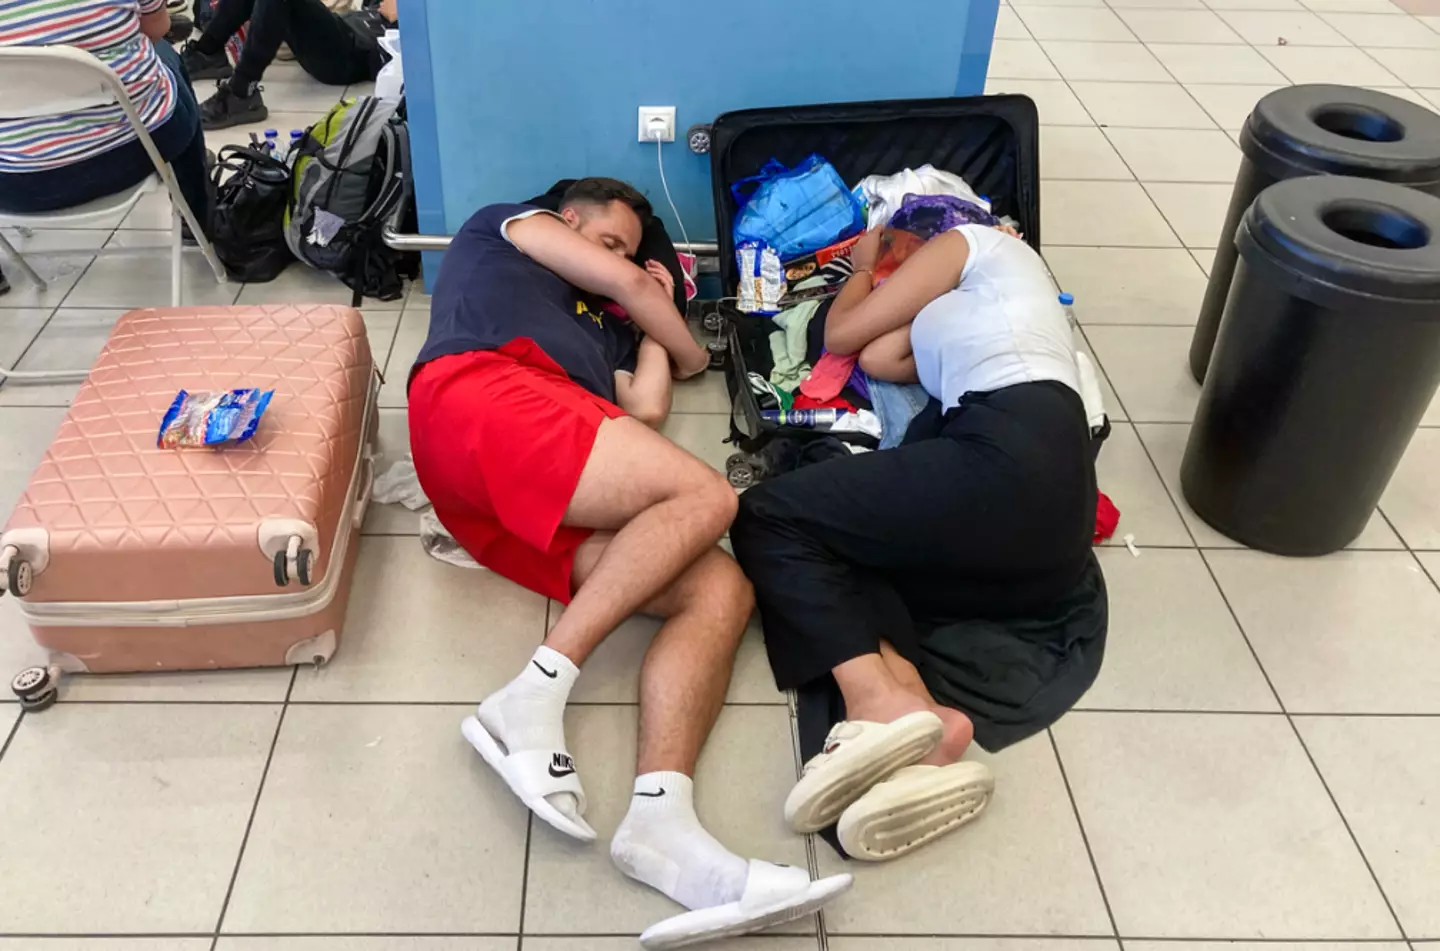 Tourists have been sleeping on sports hall floors.